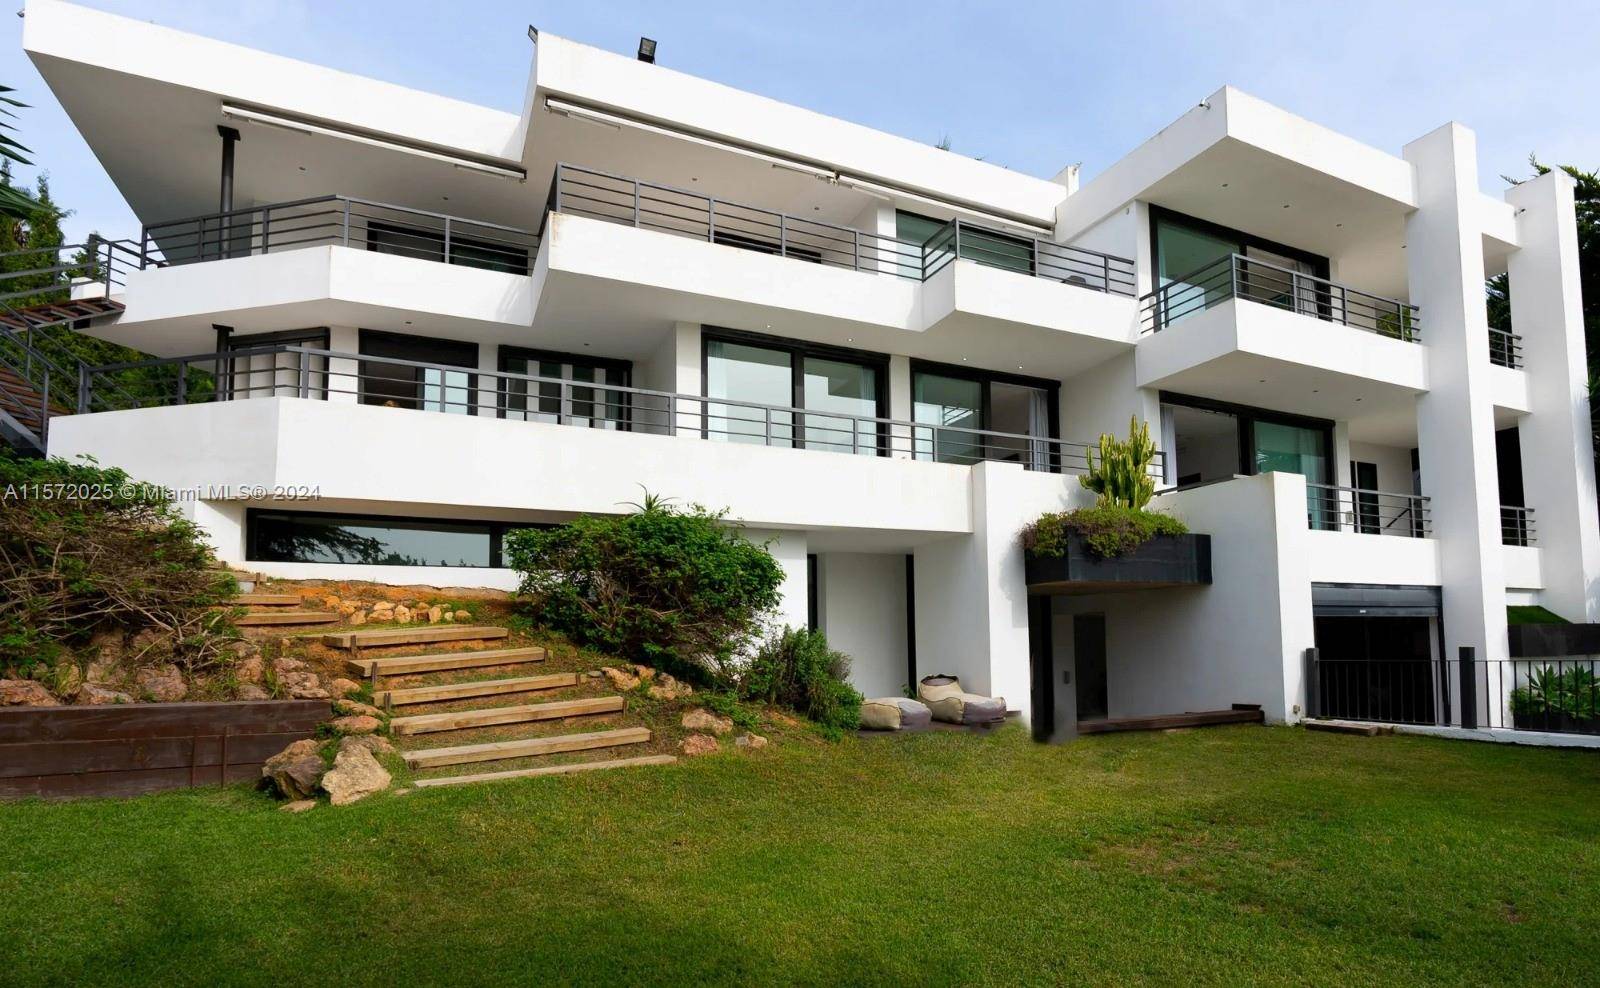 This luxury contemporary villa is a grand and stunning showpiece property spread across 3 storeis.